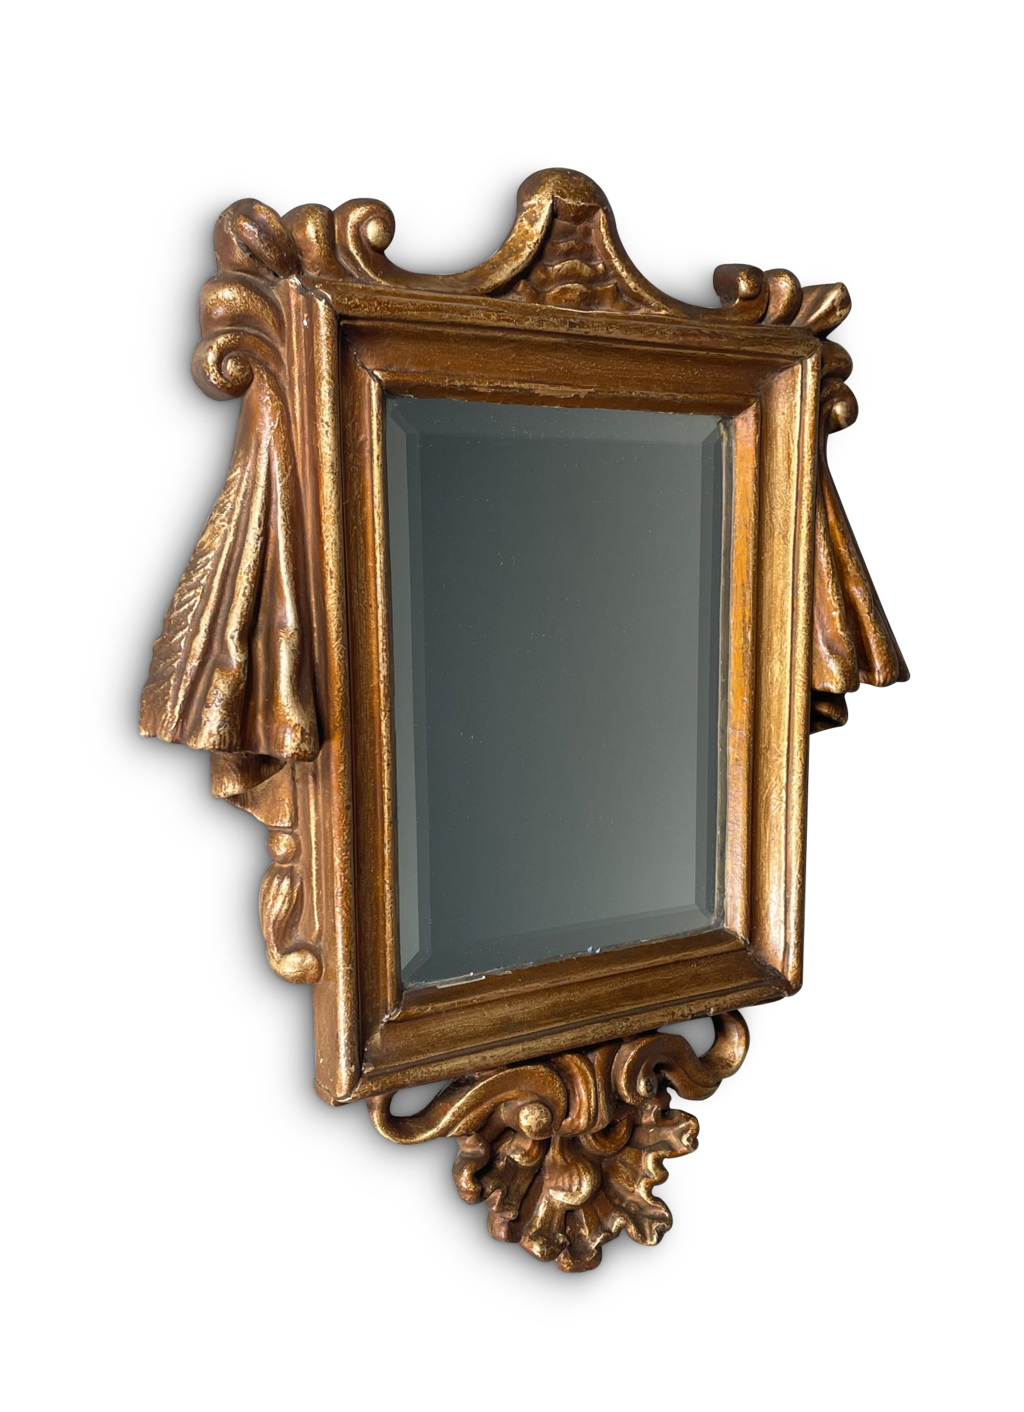 Baroque Style Giltwood Rectangular Bevelled Mirror With Drapery and Scroll Decoration